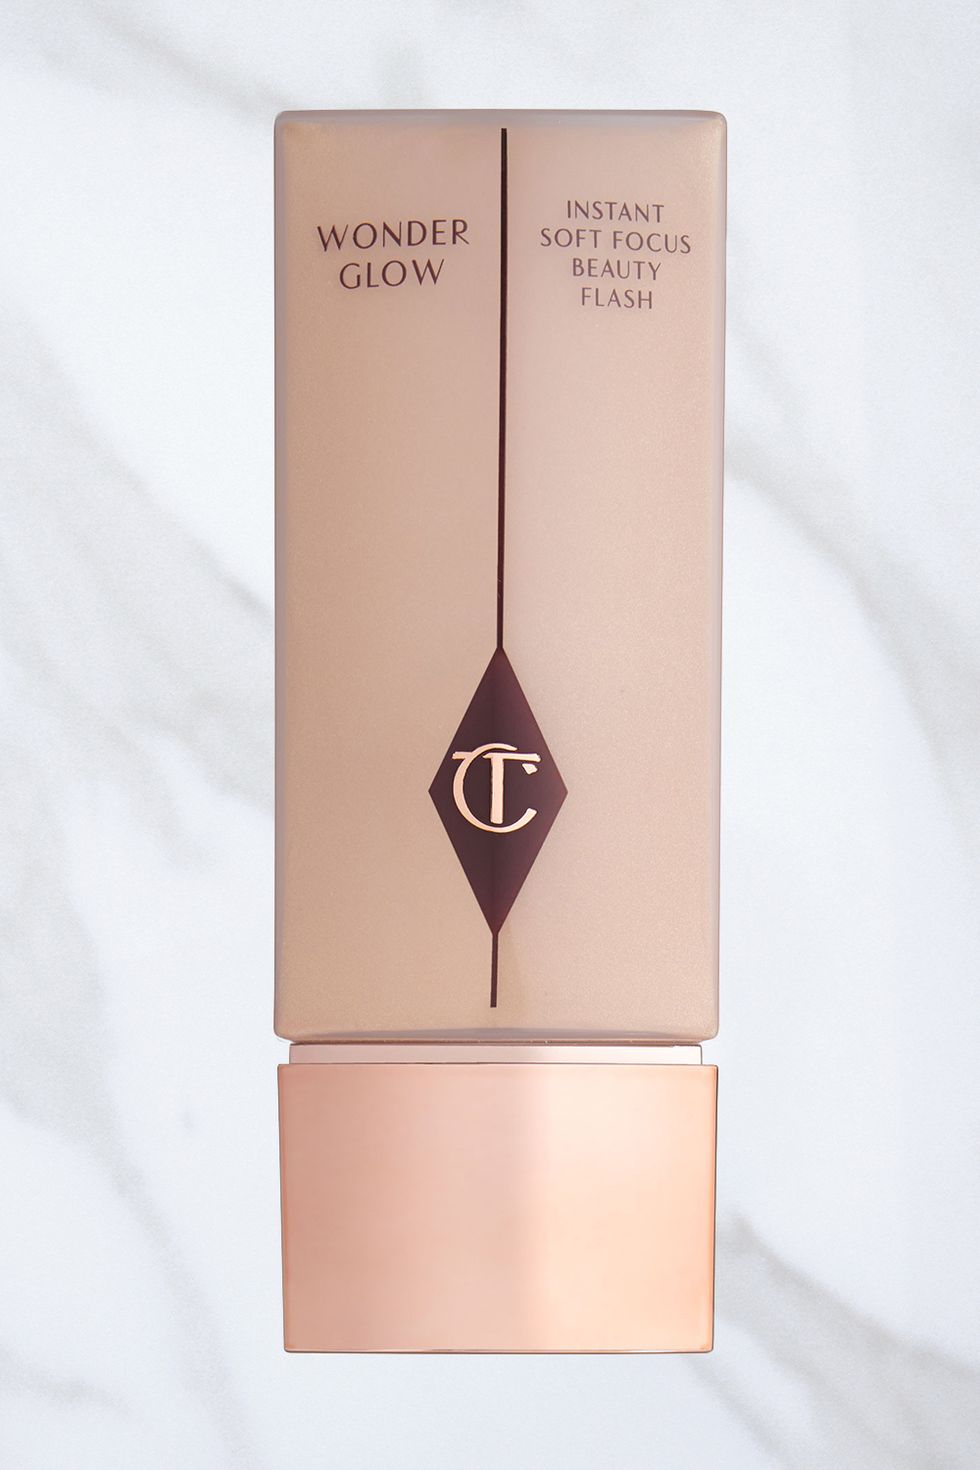 <p>To amp up the glow factor, dab a shimmery primer like <a href="http://www.charlottetilbury.com/us/wonderglow.html" target="_blank">Charlotte Tilbury Wonderglow</a>, $55, above your cheekbones, brow bones, and along your T-zone. "It creates a subtle effect that doesn't read too 'disco ball,'" says Bass.</p>